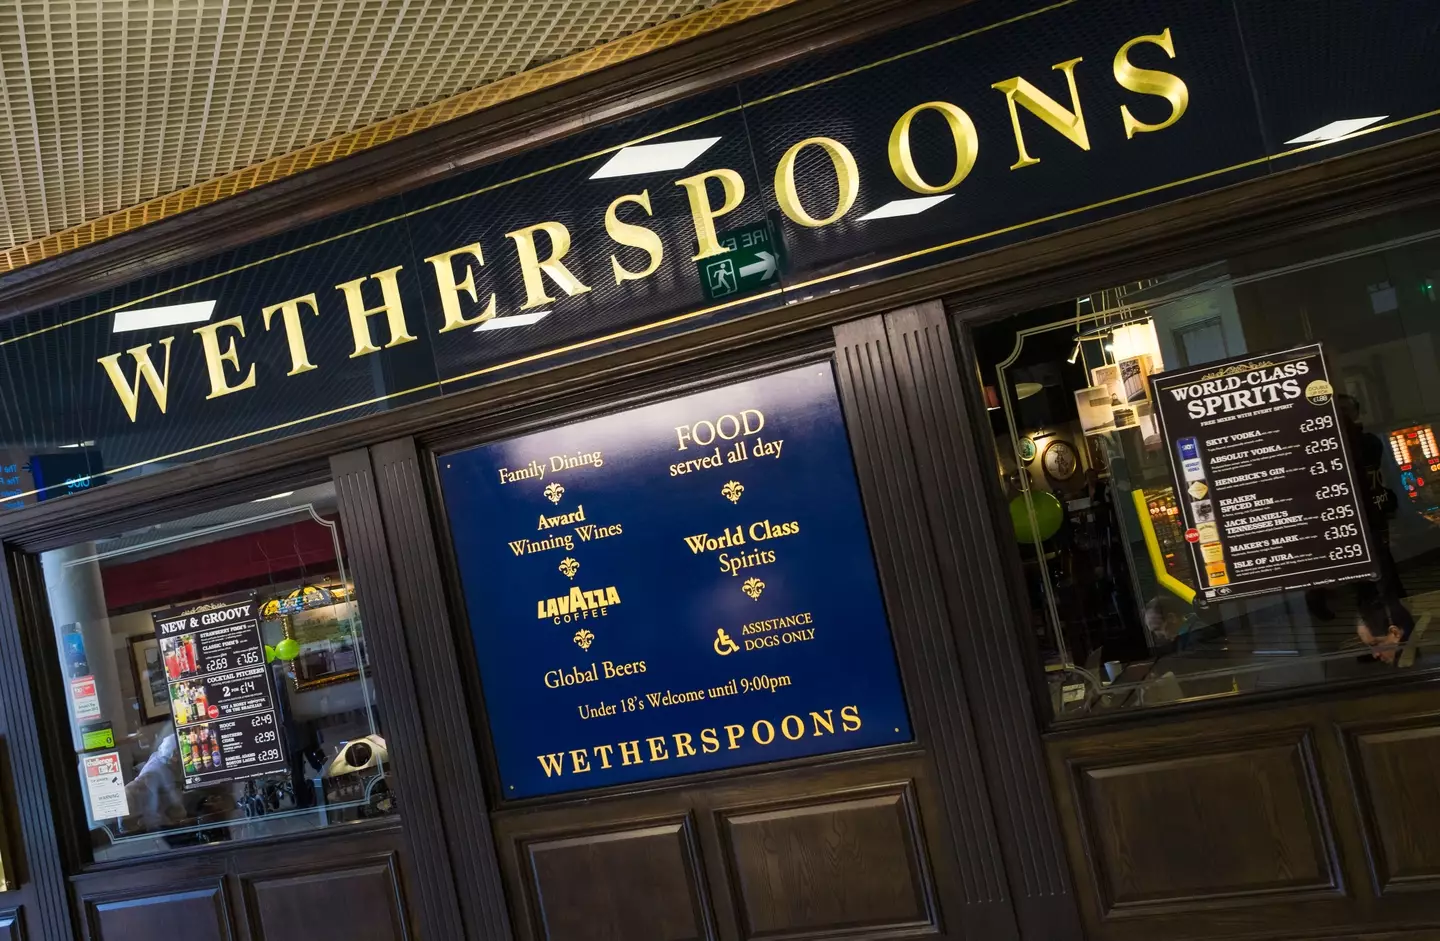 The giveaway will be available at Wetherspoons pubs.